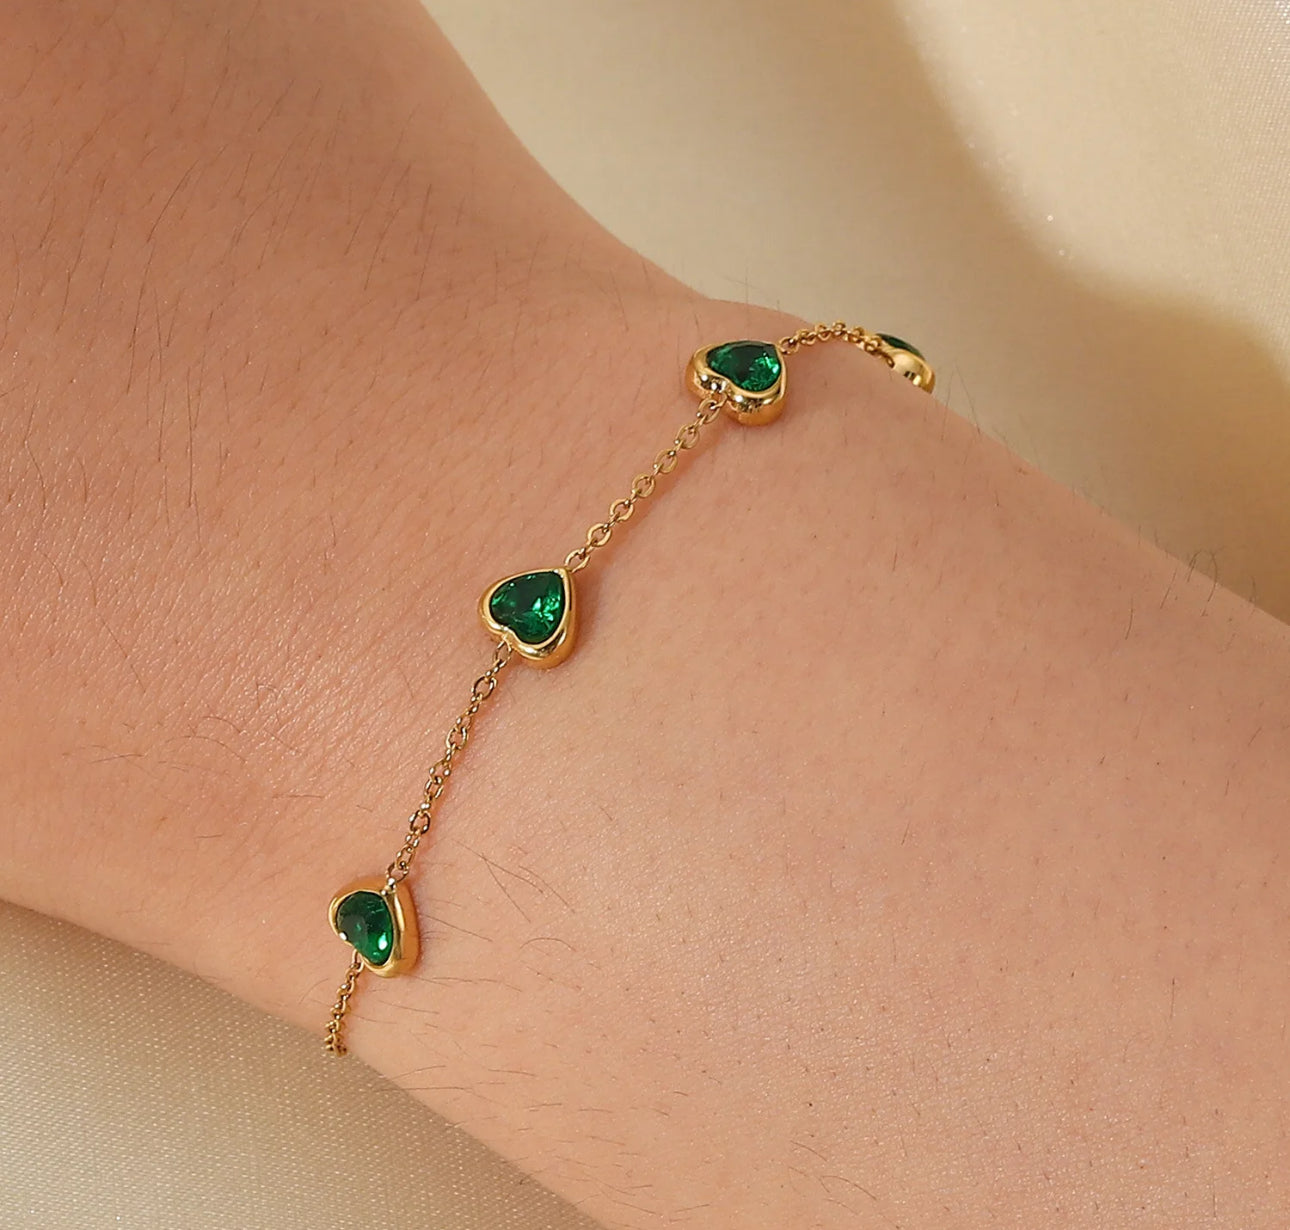 Heartfelt Charm Gold Bracelet with Emerald Accents